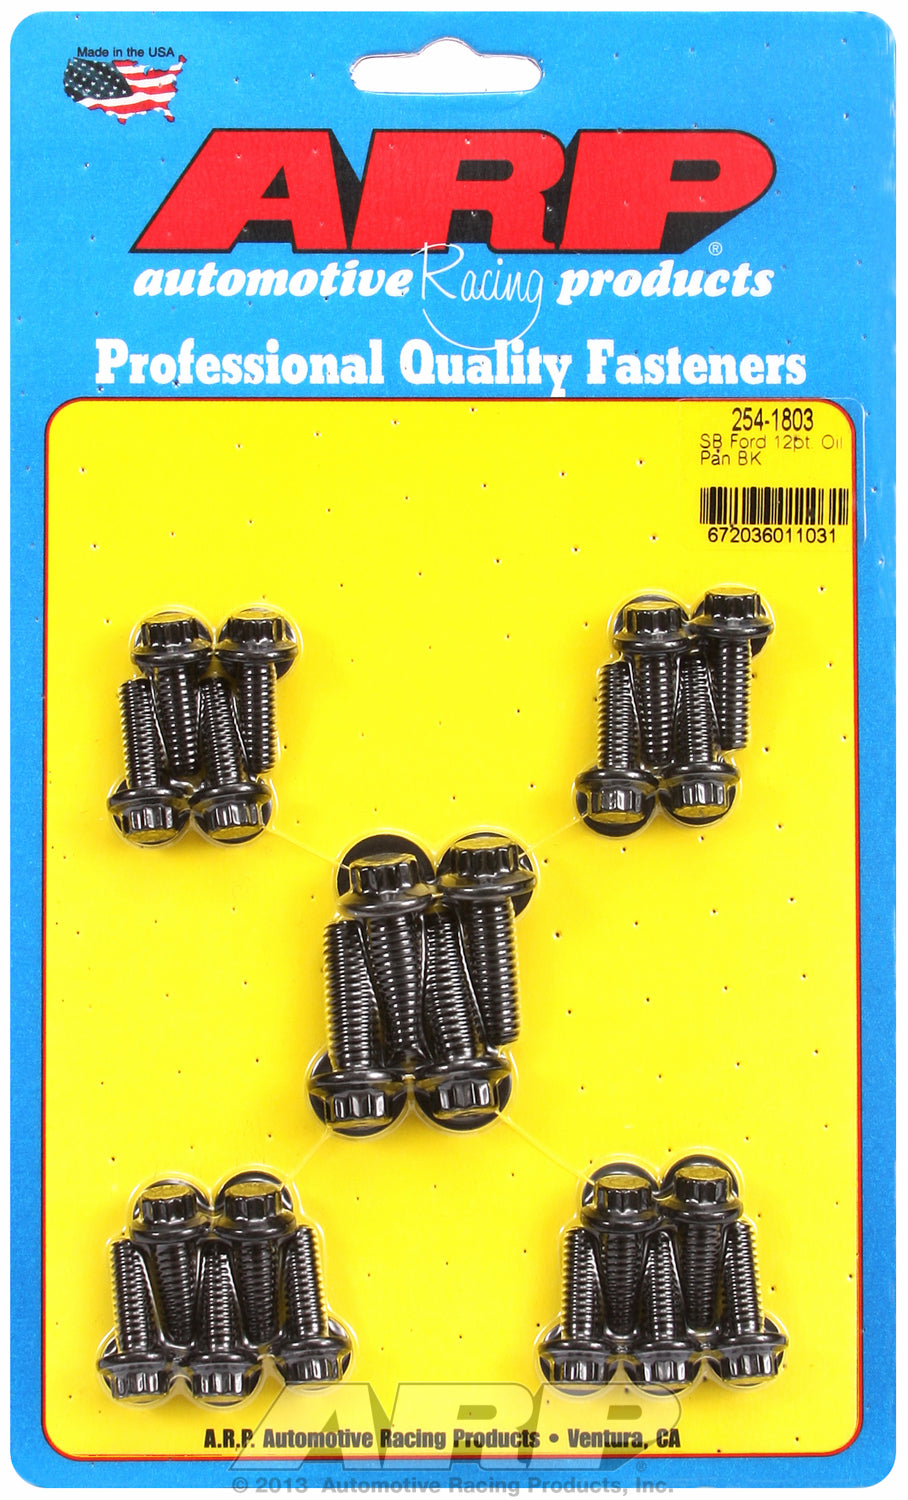 12-Pt Head Black Oxide Oil Pan Bolt Kit for Ford 302-351W (late model with side rails)